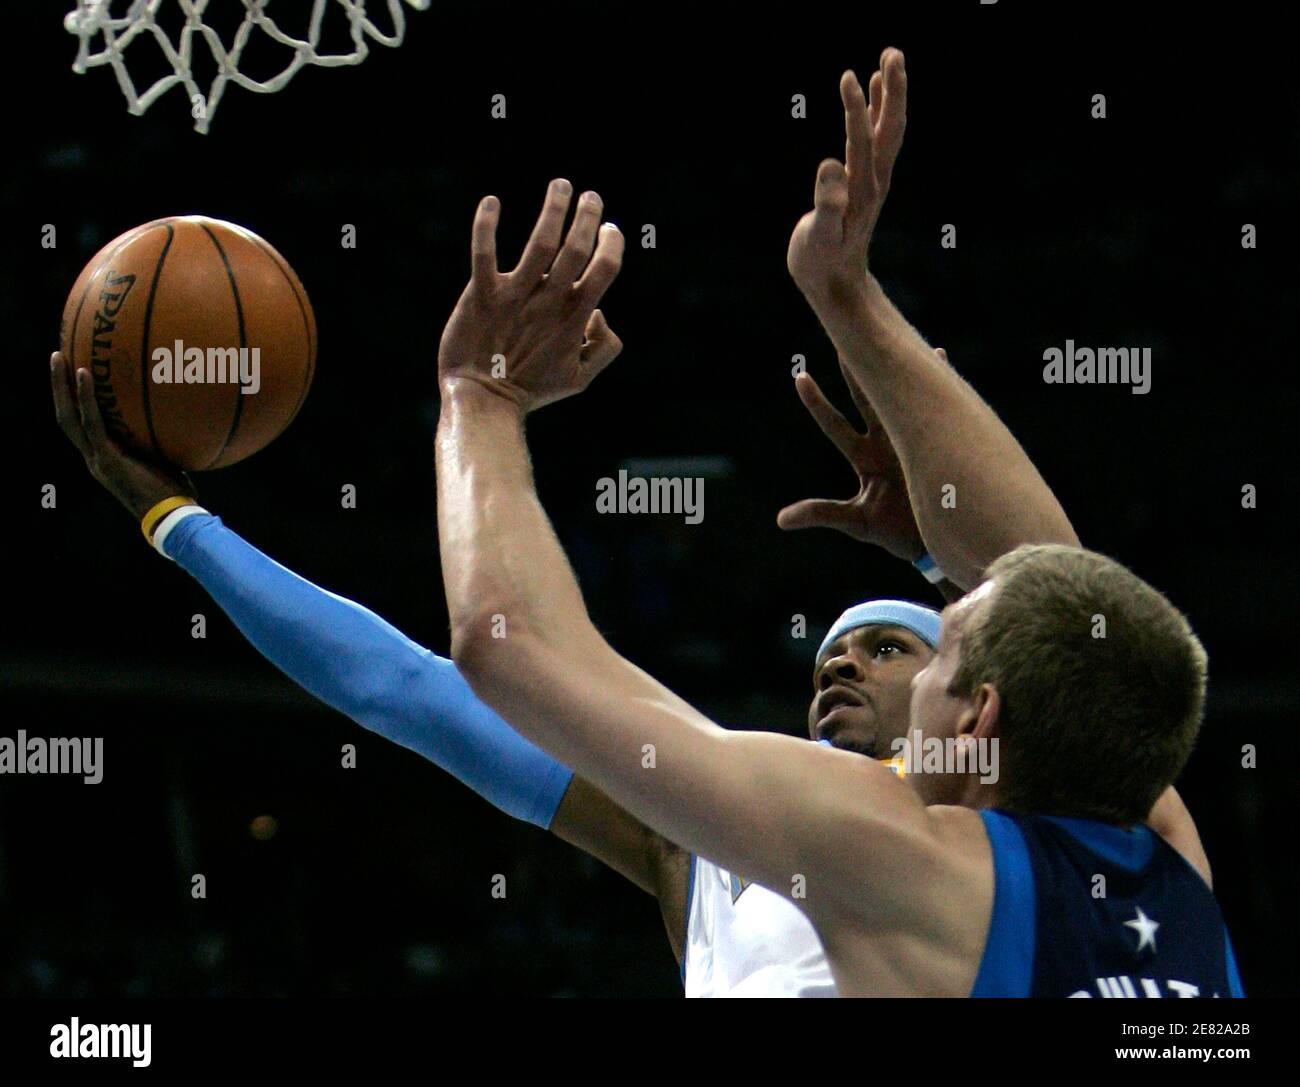 Denver Nuggets guard Allen Iverson (L) shoots past Dallas Mavericks forward Dirk Nowitzki in the first quarter of their NBA basketball game in Denver, Colorado April 6, 2007. REUTERS/Rick Wilking (UNITED STATES) Stock Photo